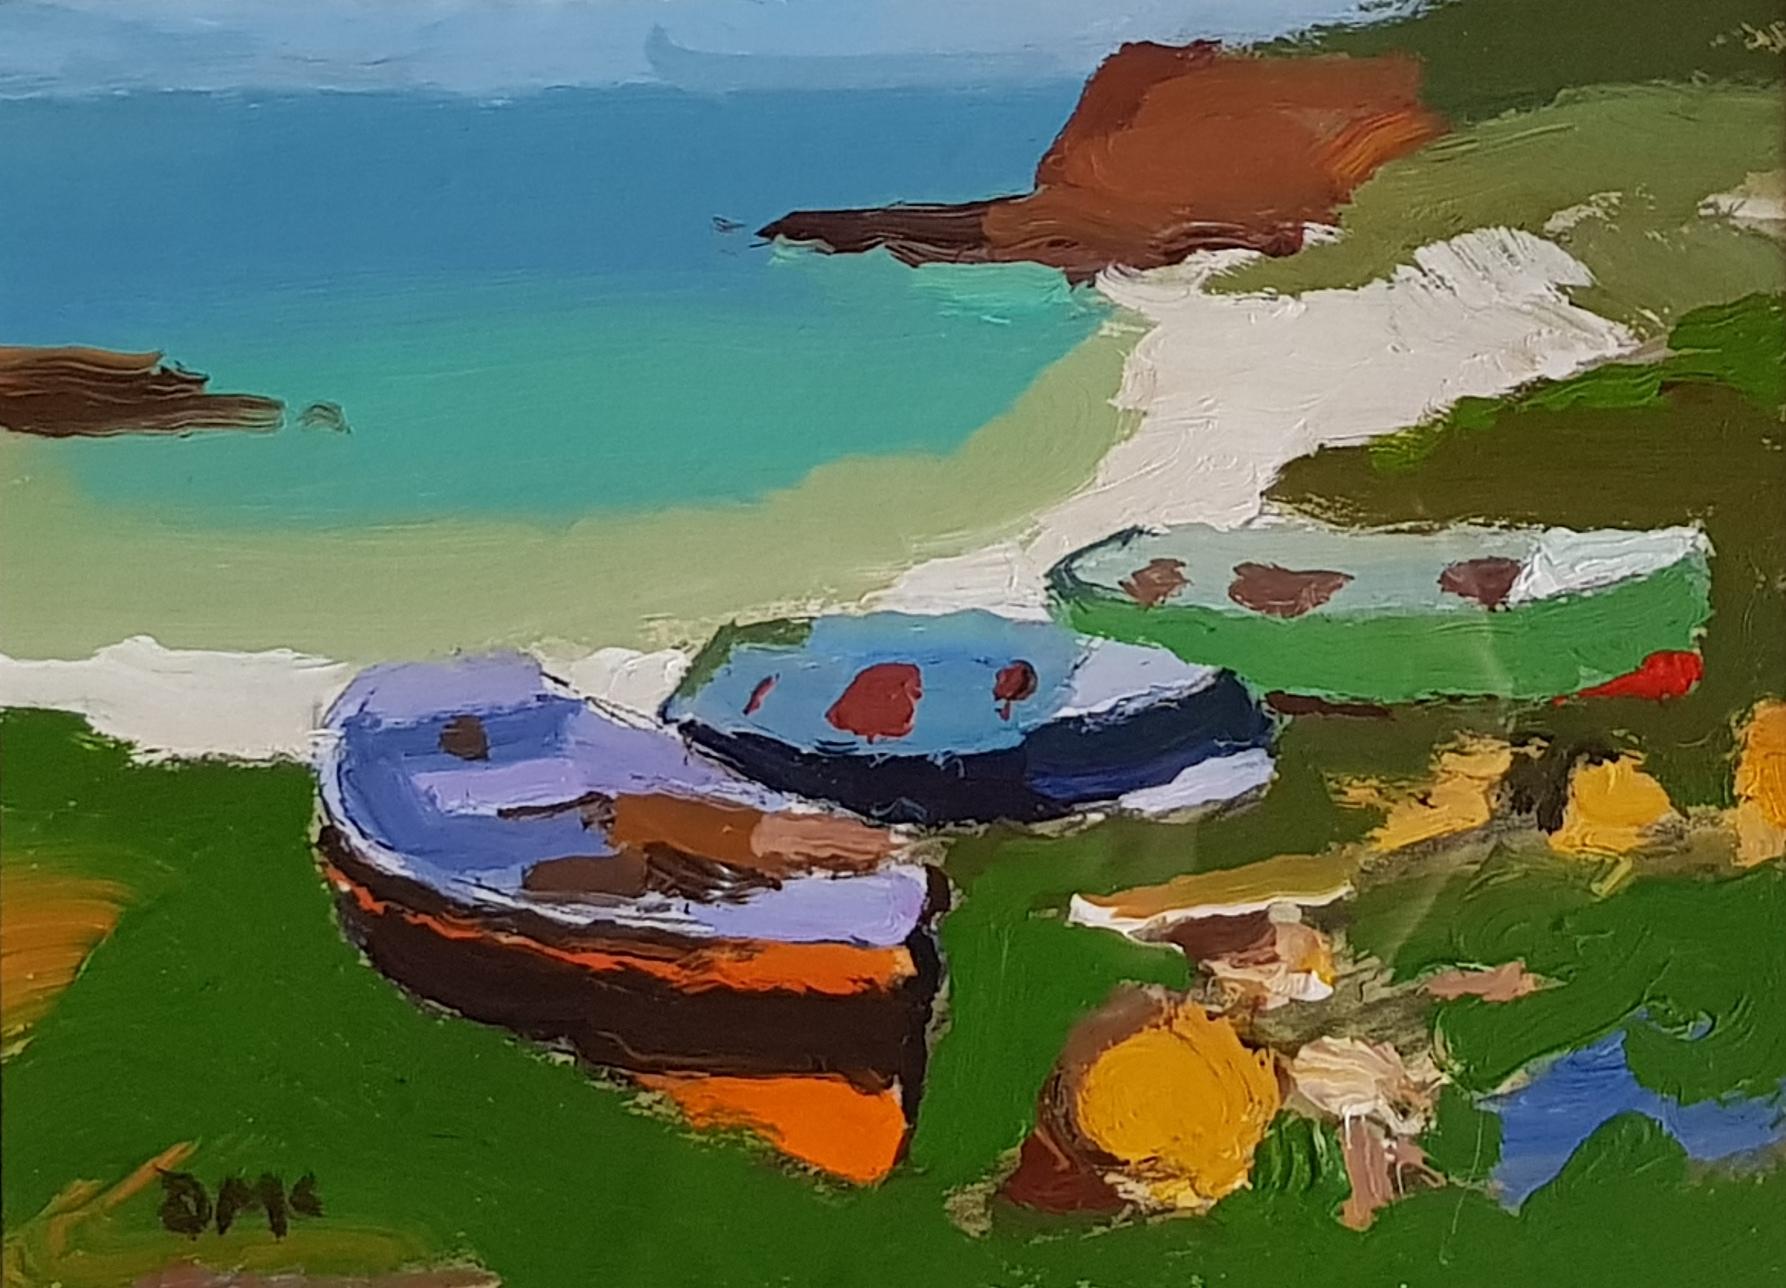 Donald McIntyre Abstract Painting - 'Three Fishing Boats on the Shore', West coast of Scotland, Beach Scene